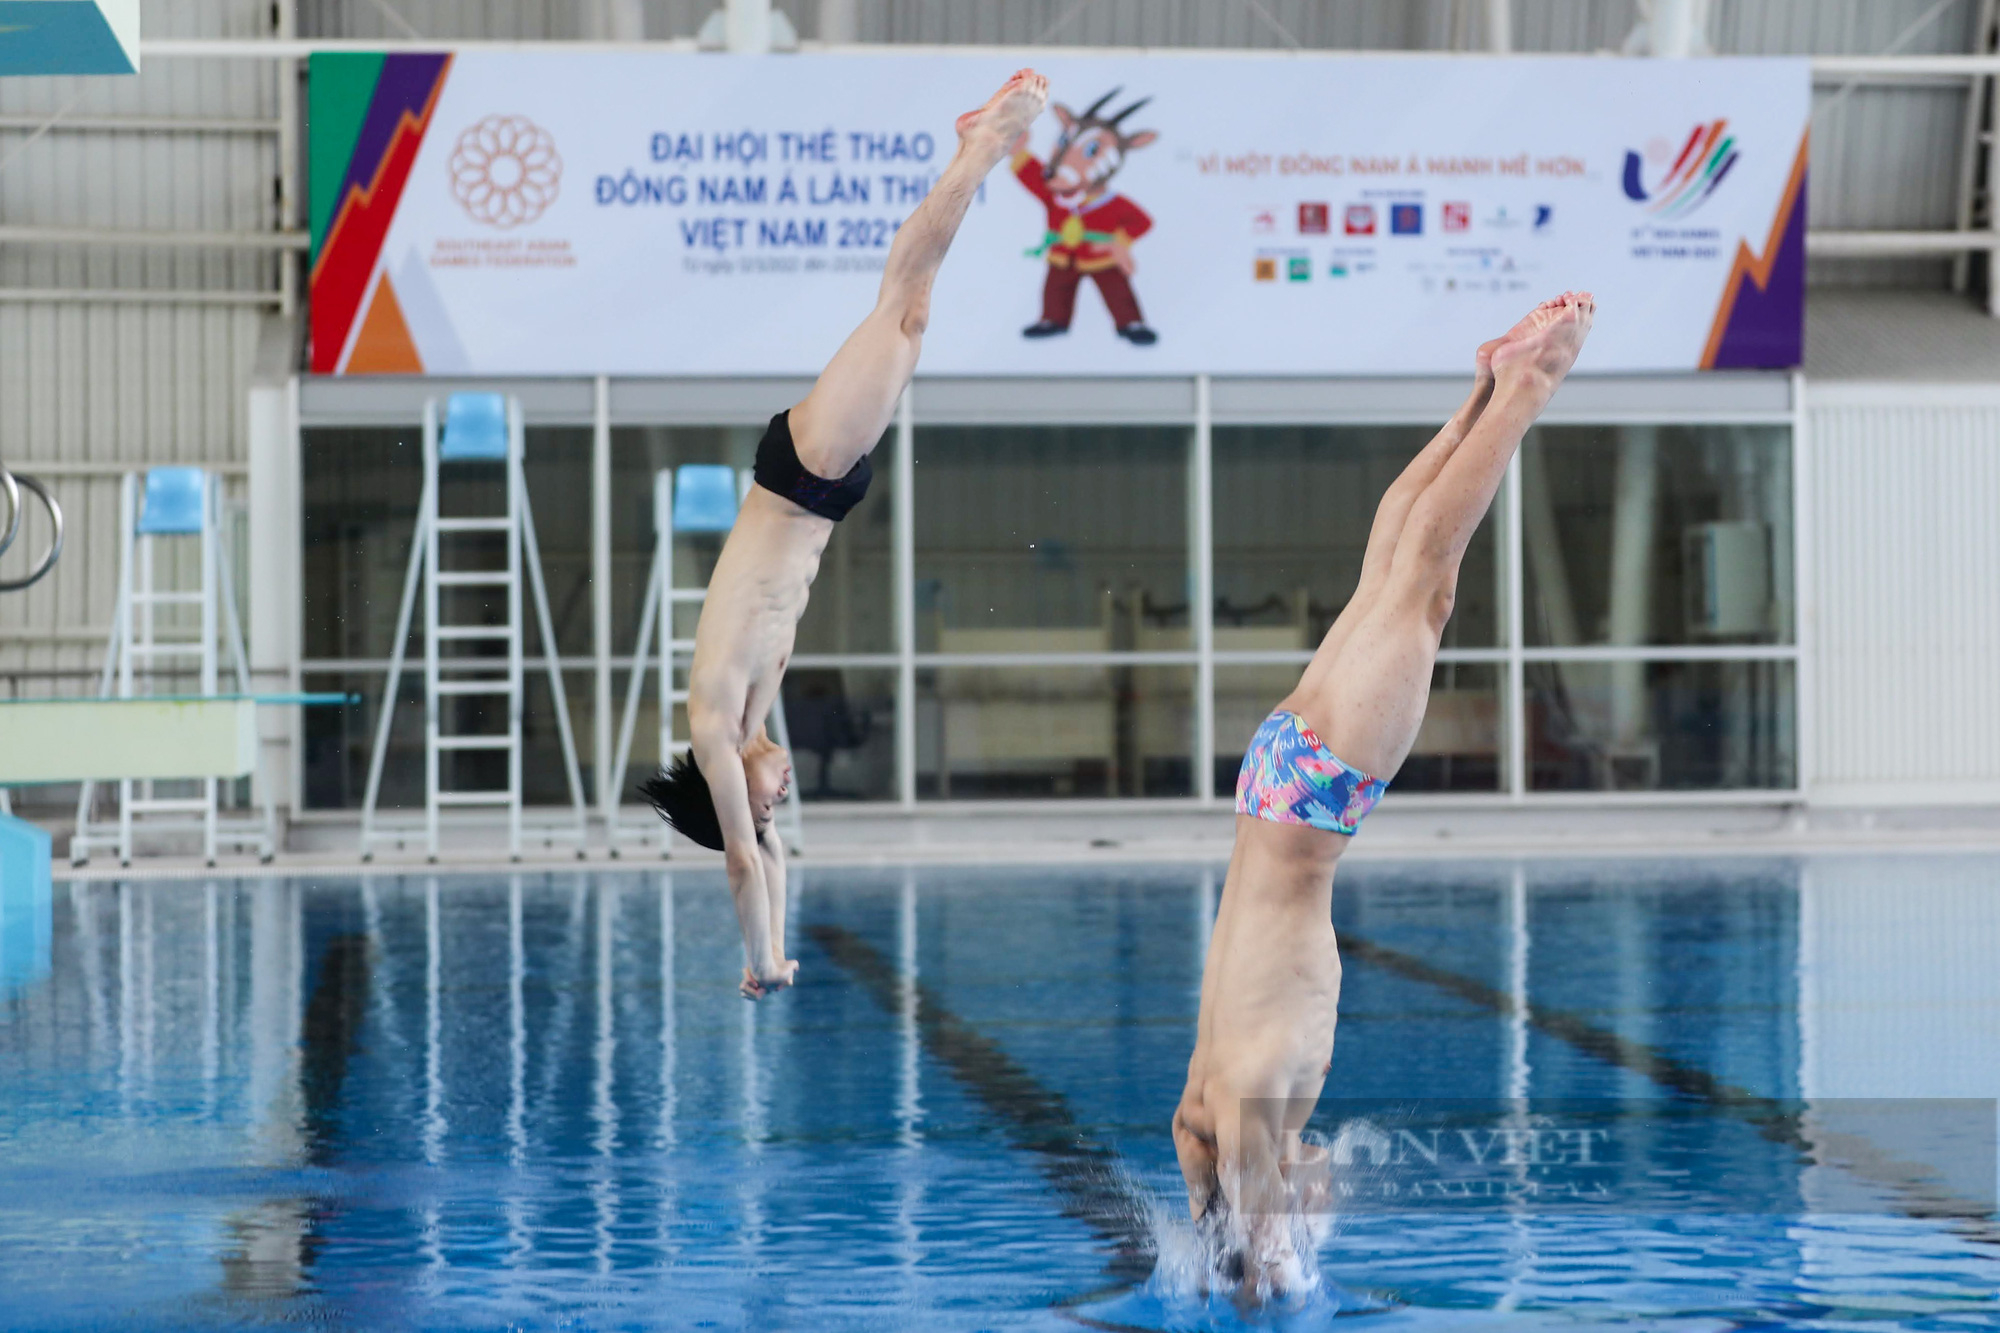 Watch with your own eyes the Vietnamese diving team practice to prepare for the 31st SEA Games - Photo 10.